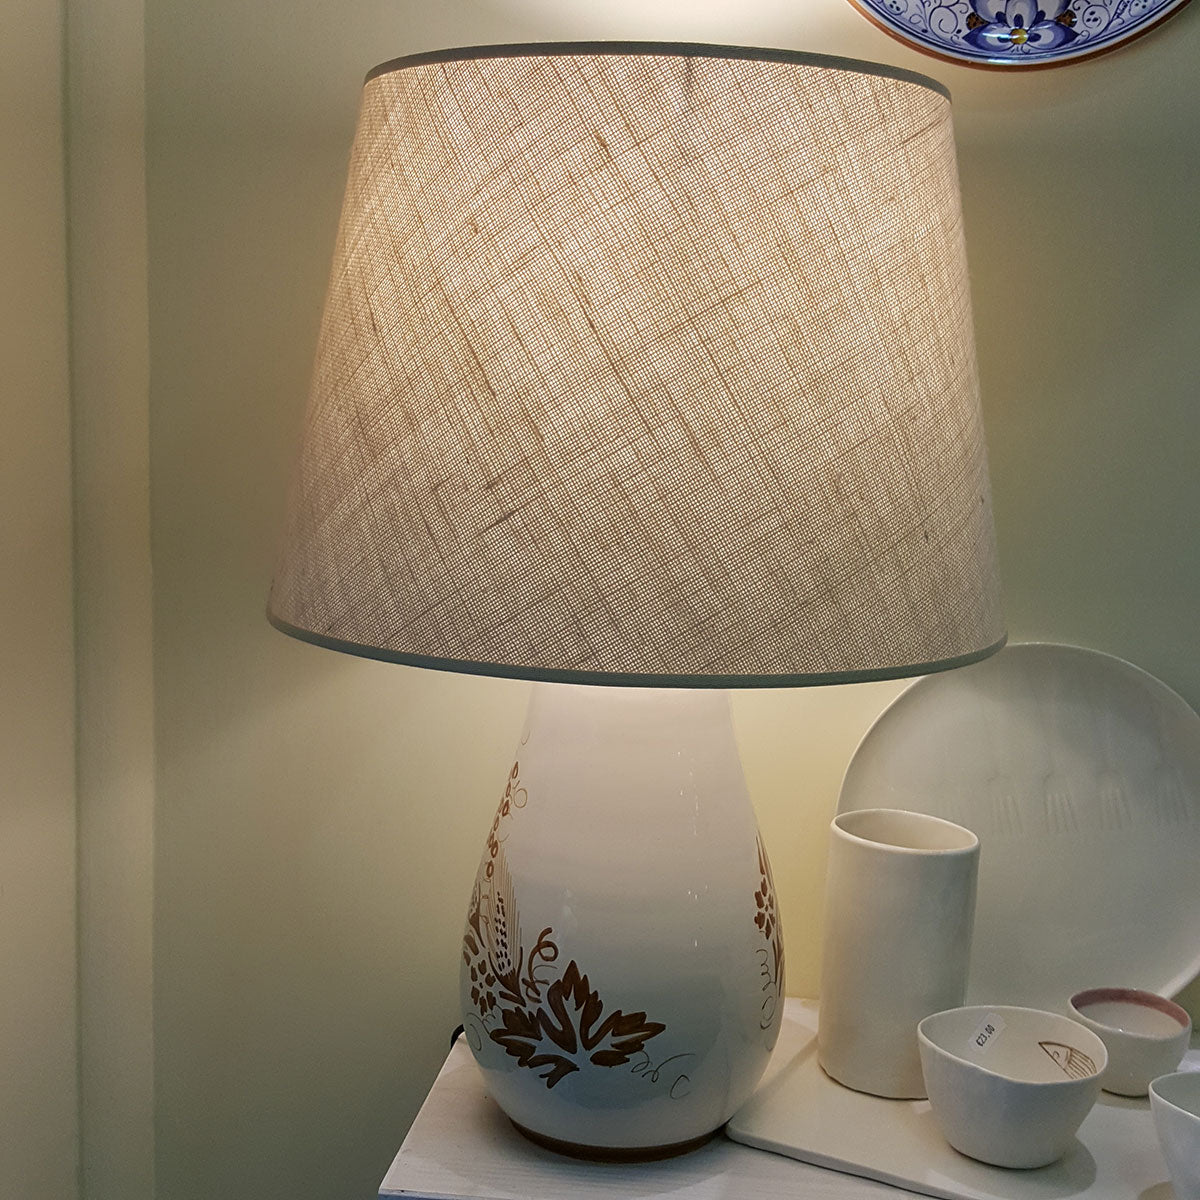 Table lamp with Romagna decorations